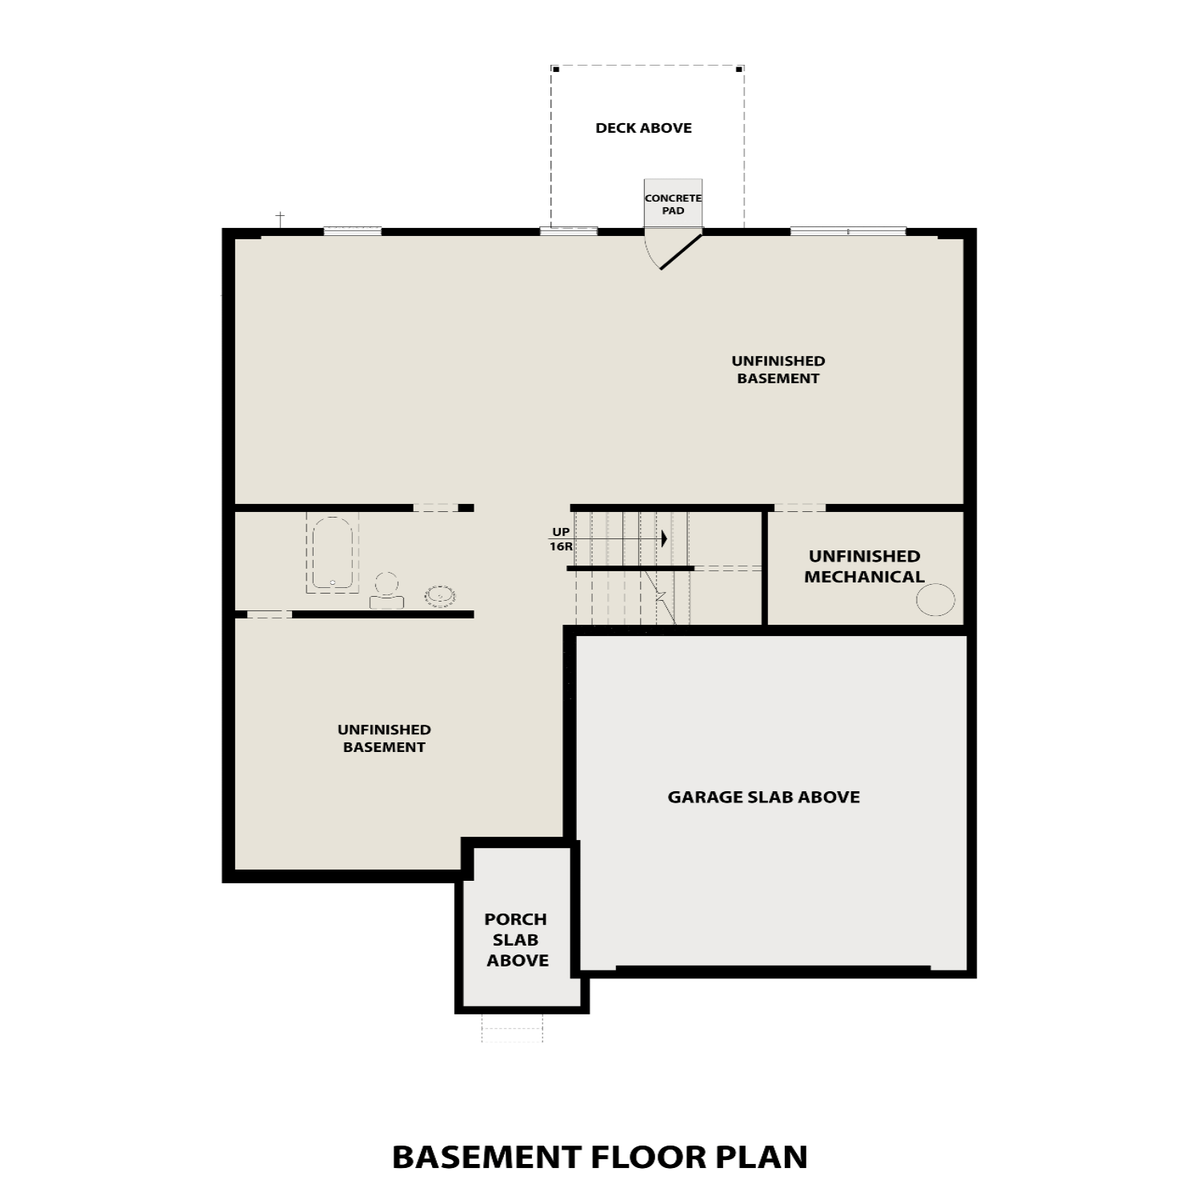 3 - The Hickory C- Unfinished Basement floor plan layout for 40 Brookside Way in Davidson Homes' Mountainbrook community.